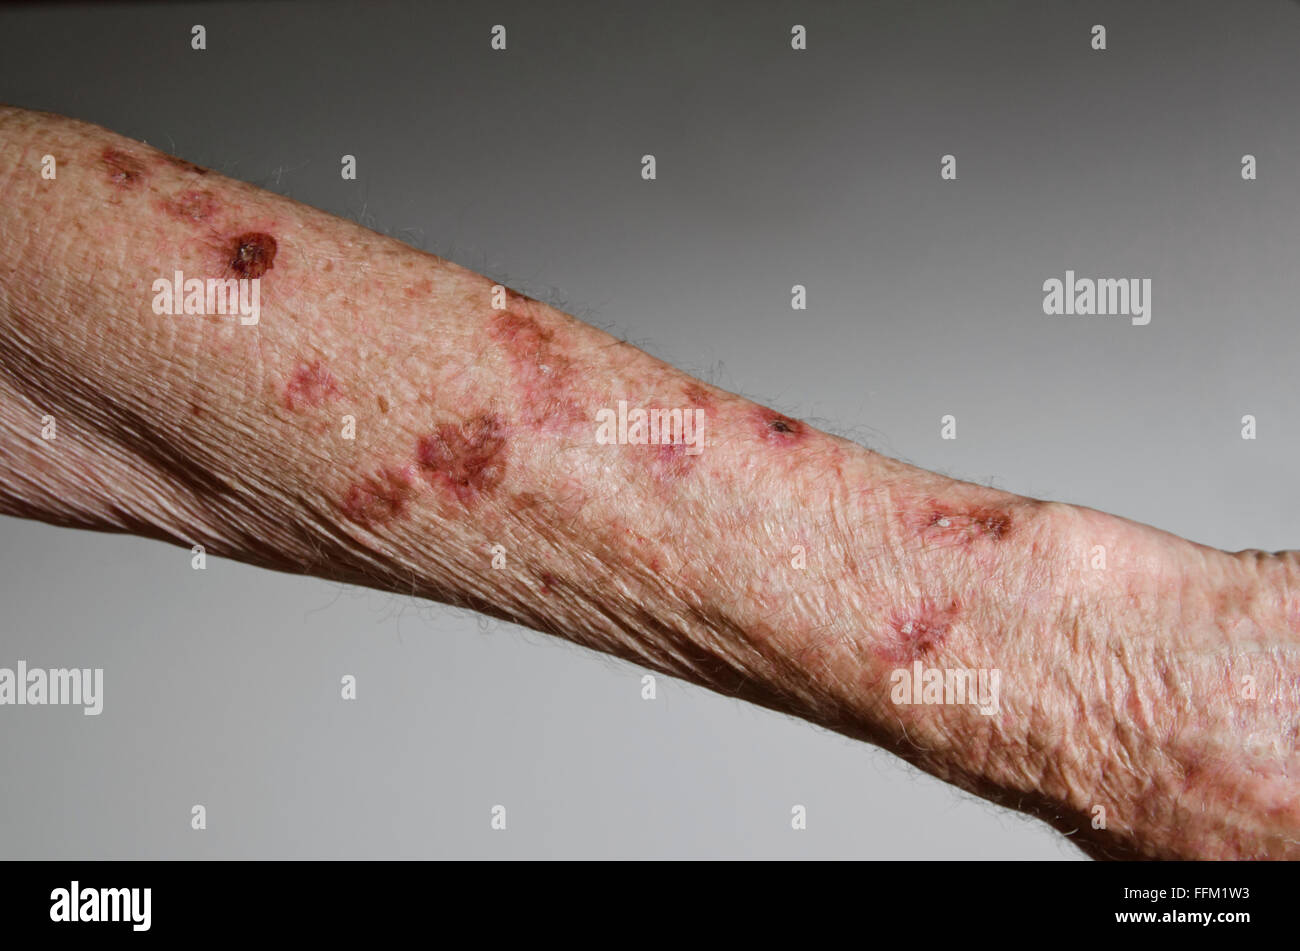 Types Of Skin Cancer On Arms